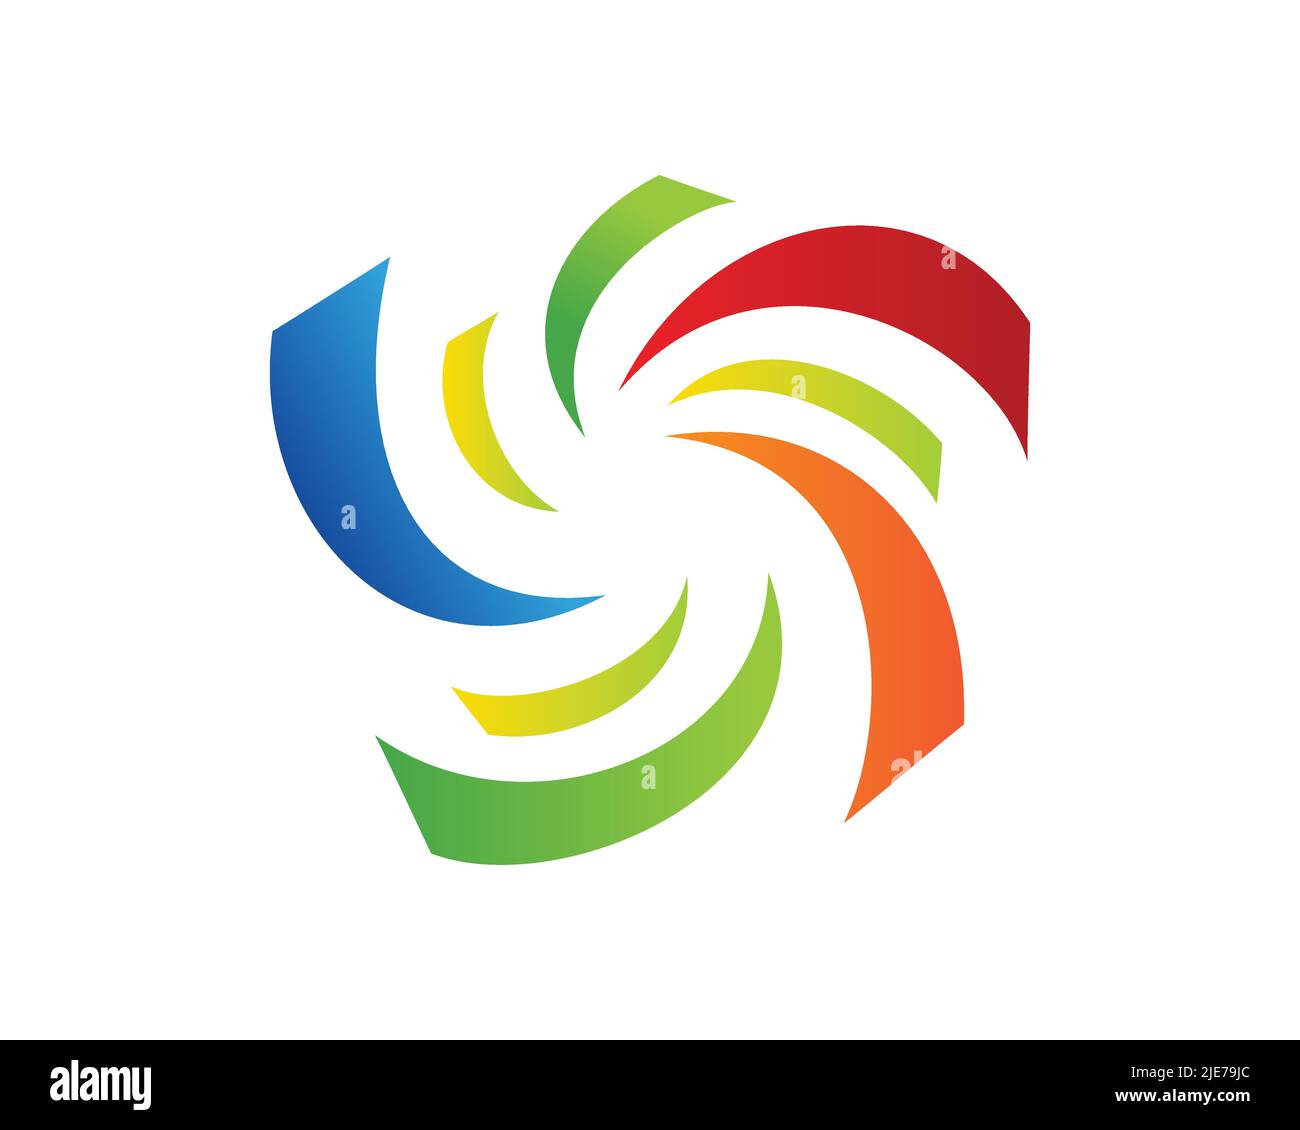 Simple and Creative Abstract Swirl Stock Vector